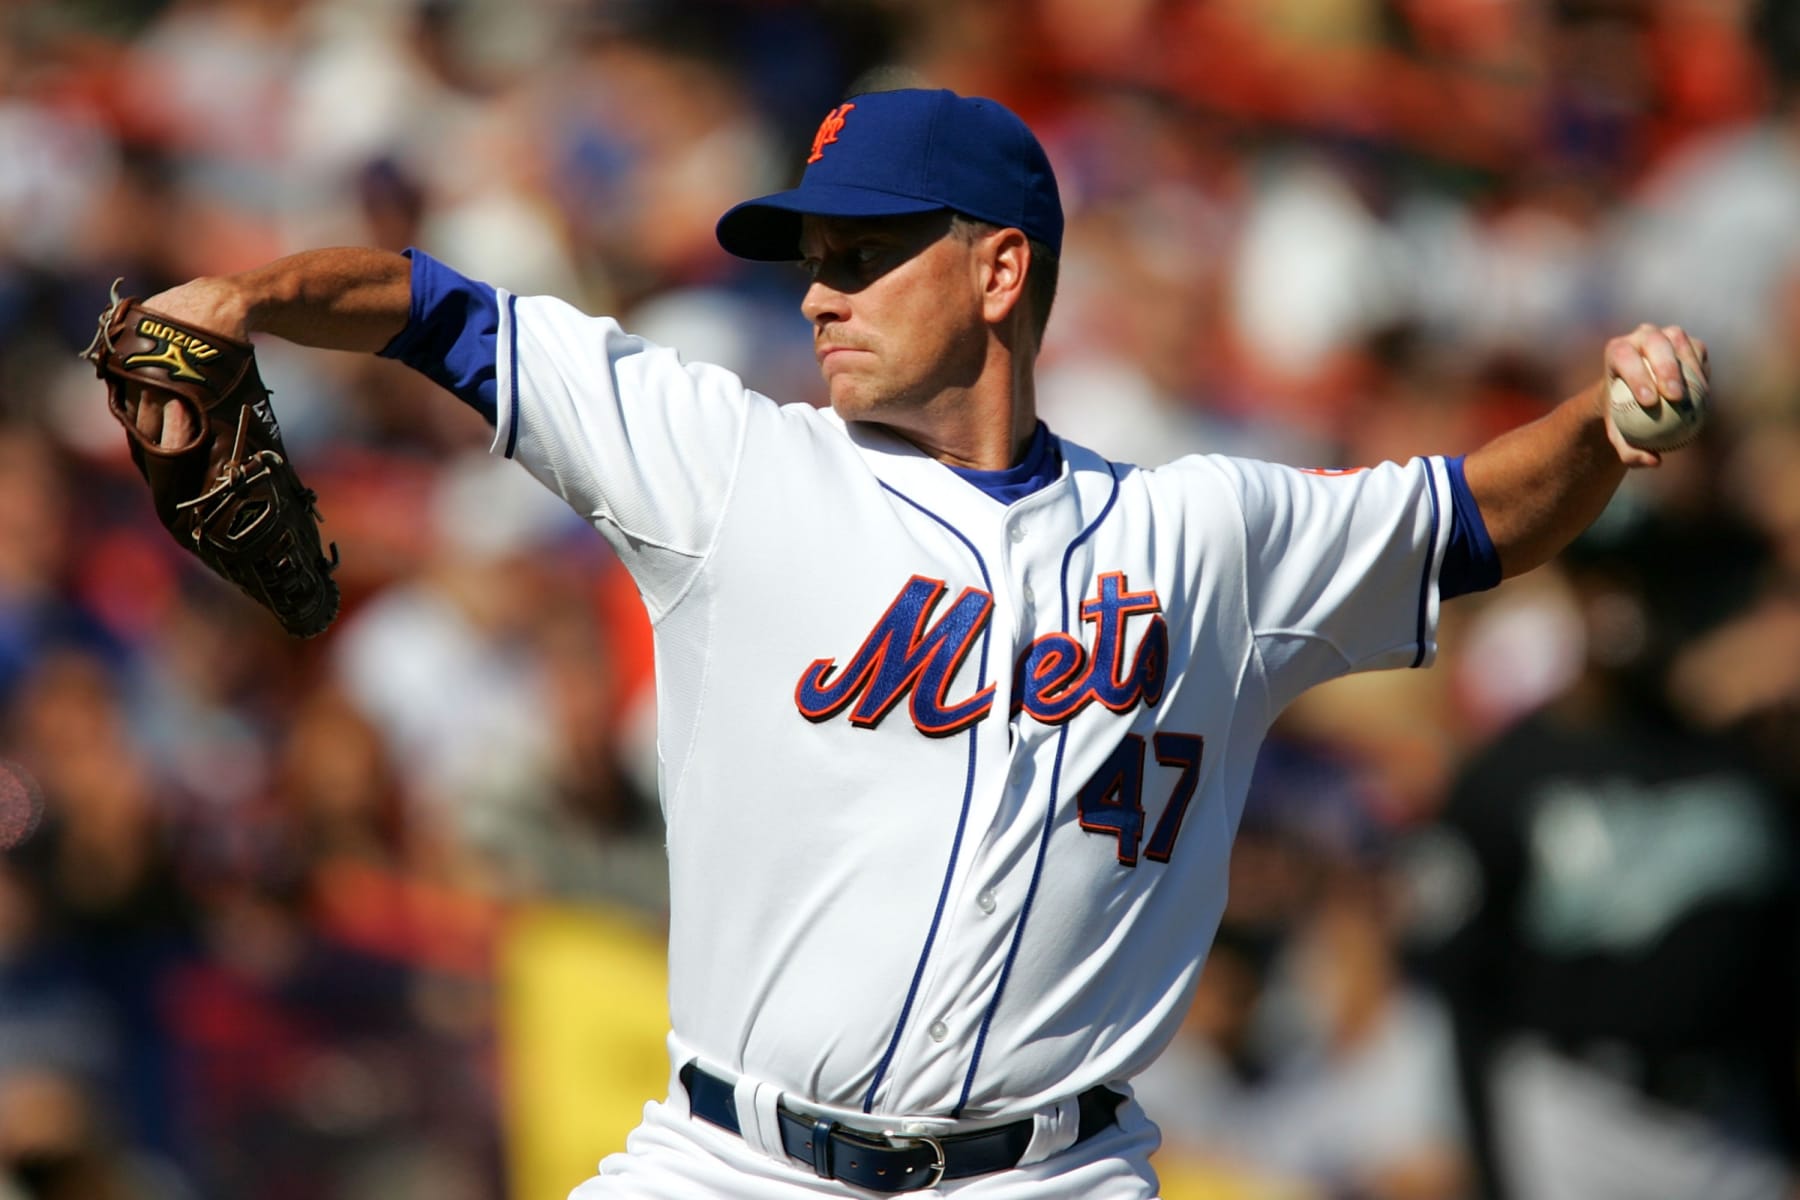 October 5, 2006: Glavine leads Mets to win over Dodgers in Game 2